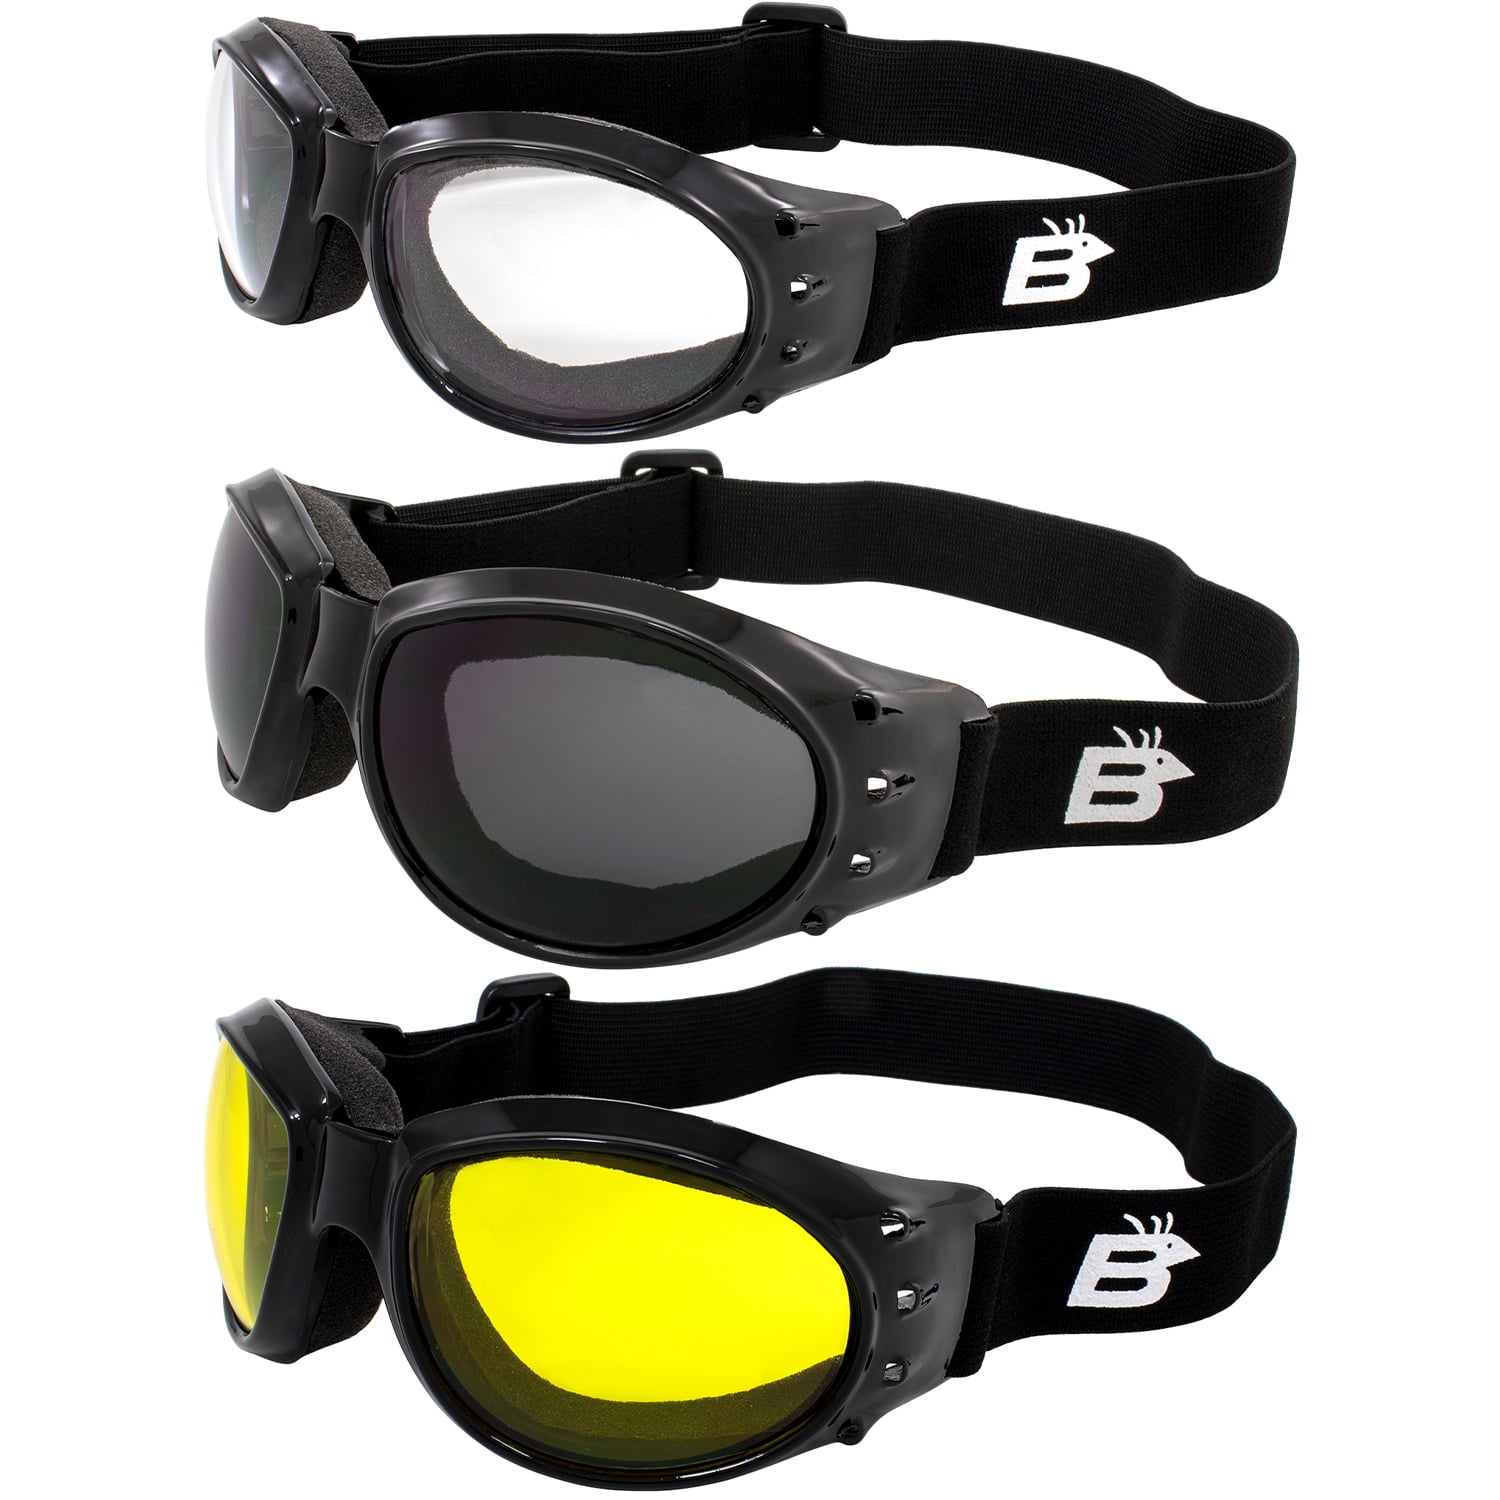 3 Pair Adventure Foldable Padded Riding Goggles Set Clear Smoke and Yellow Lenses 